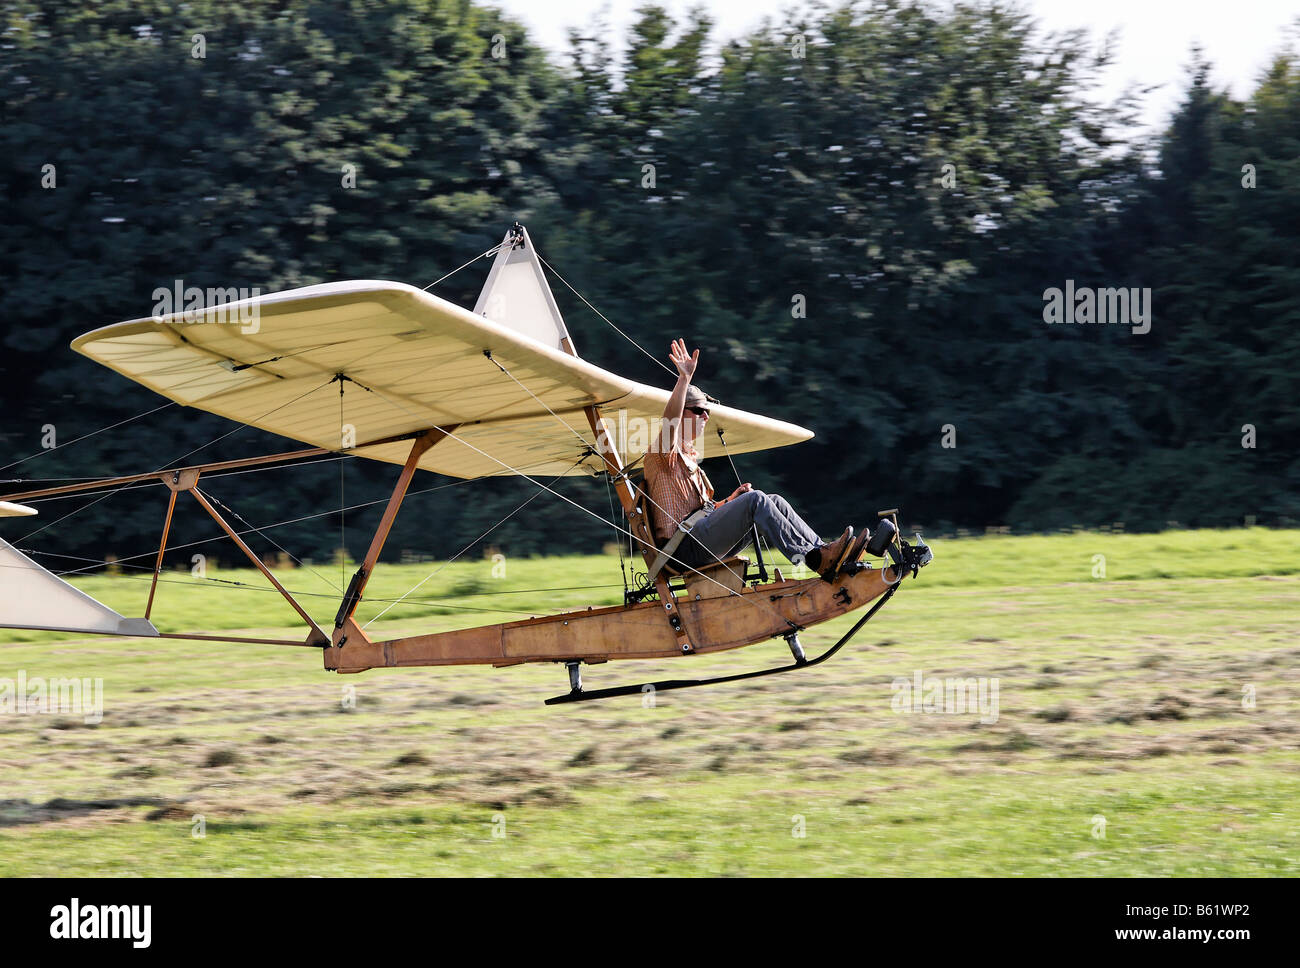 Pilot landing the historic glider SG38 on a field and waving to an audience, wooden construction with an open seat, glider to t Stock Photo